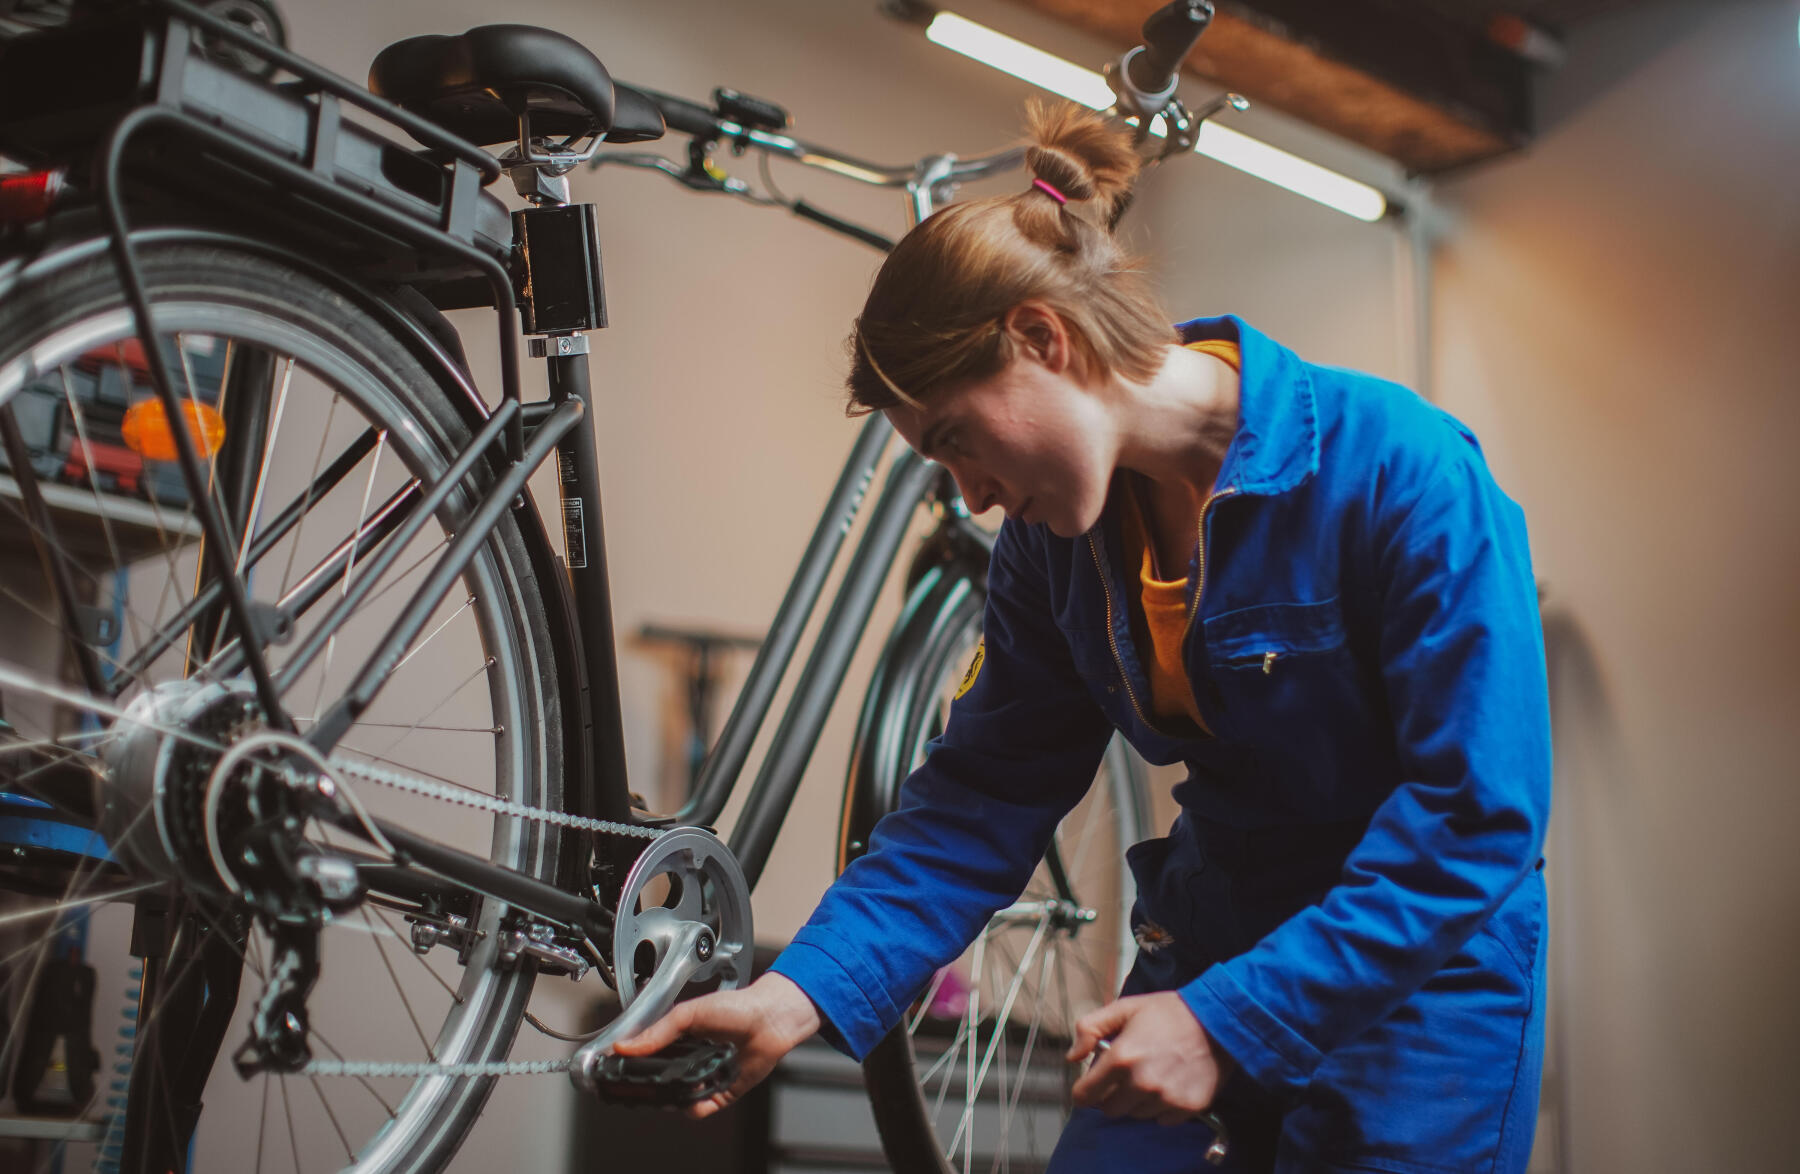 A quick guide to repairing your e-bike